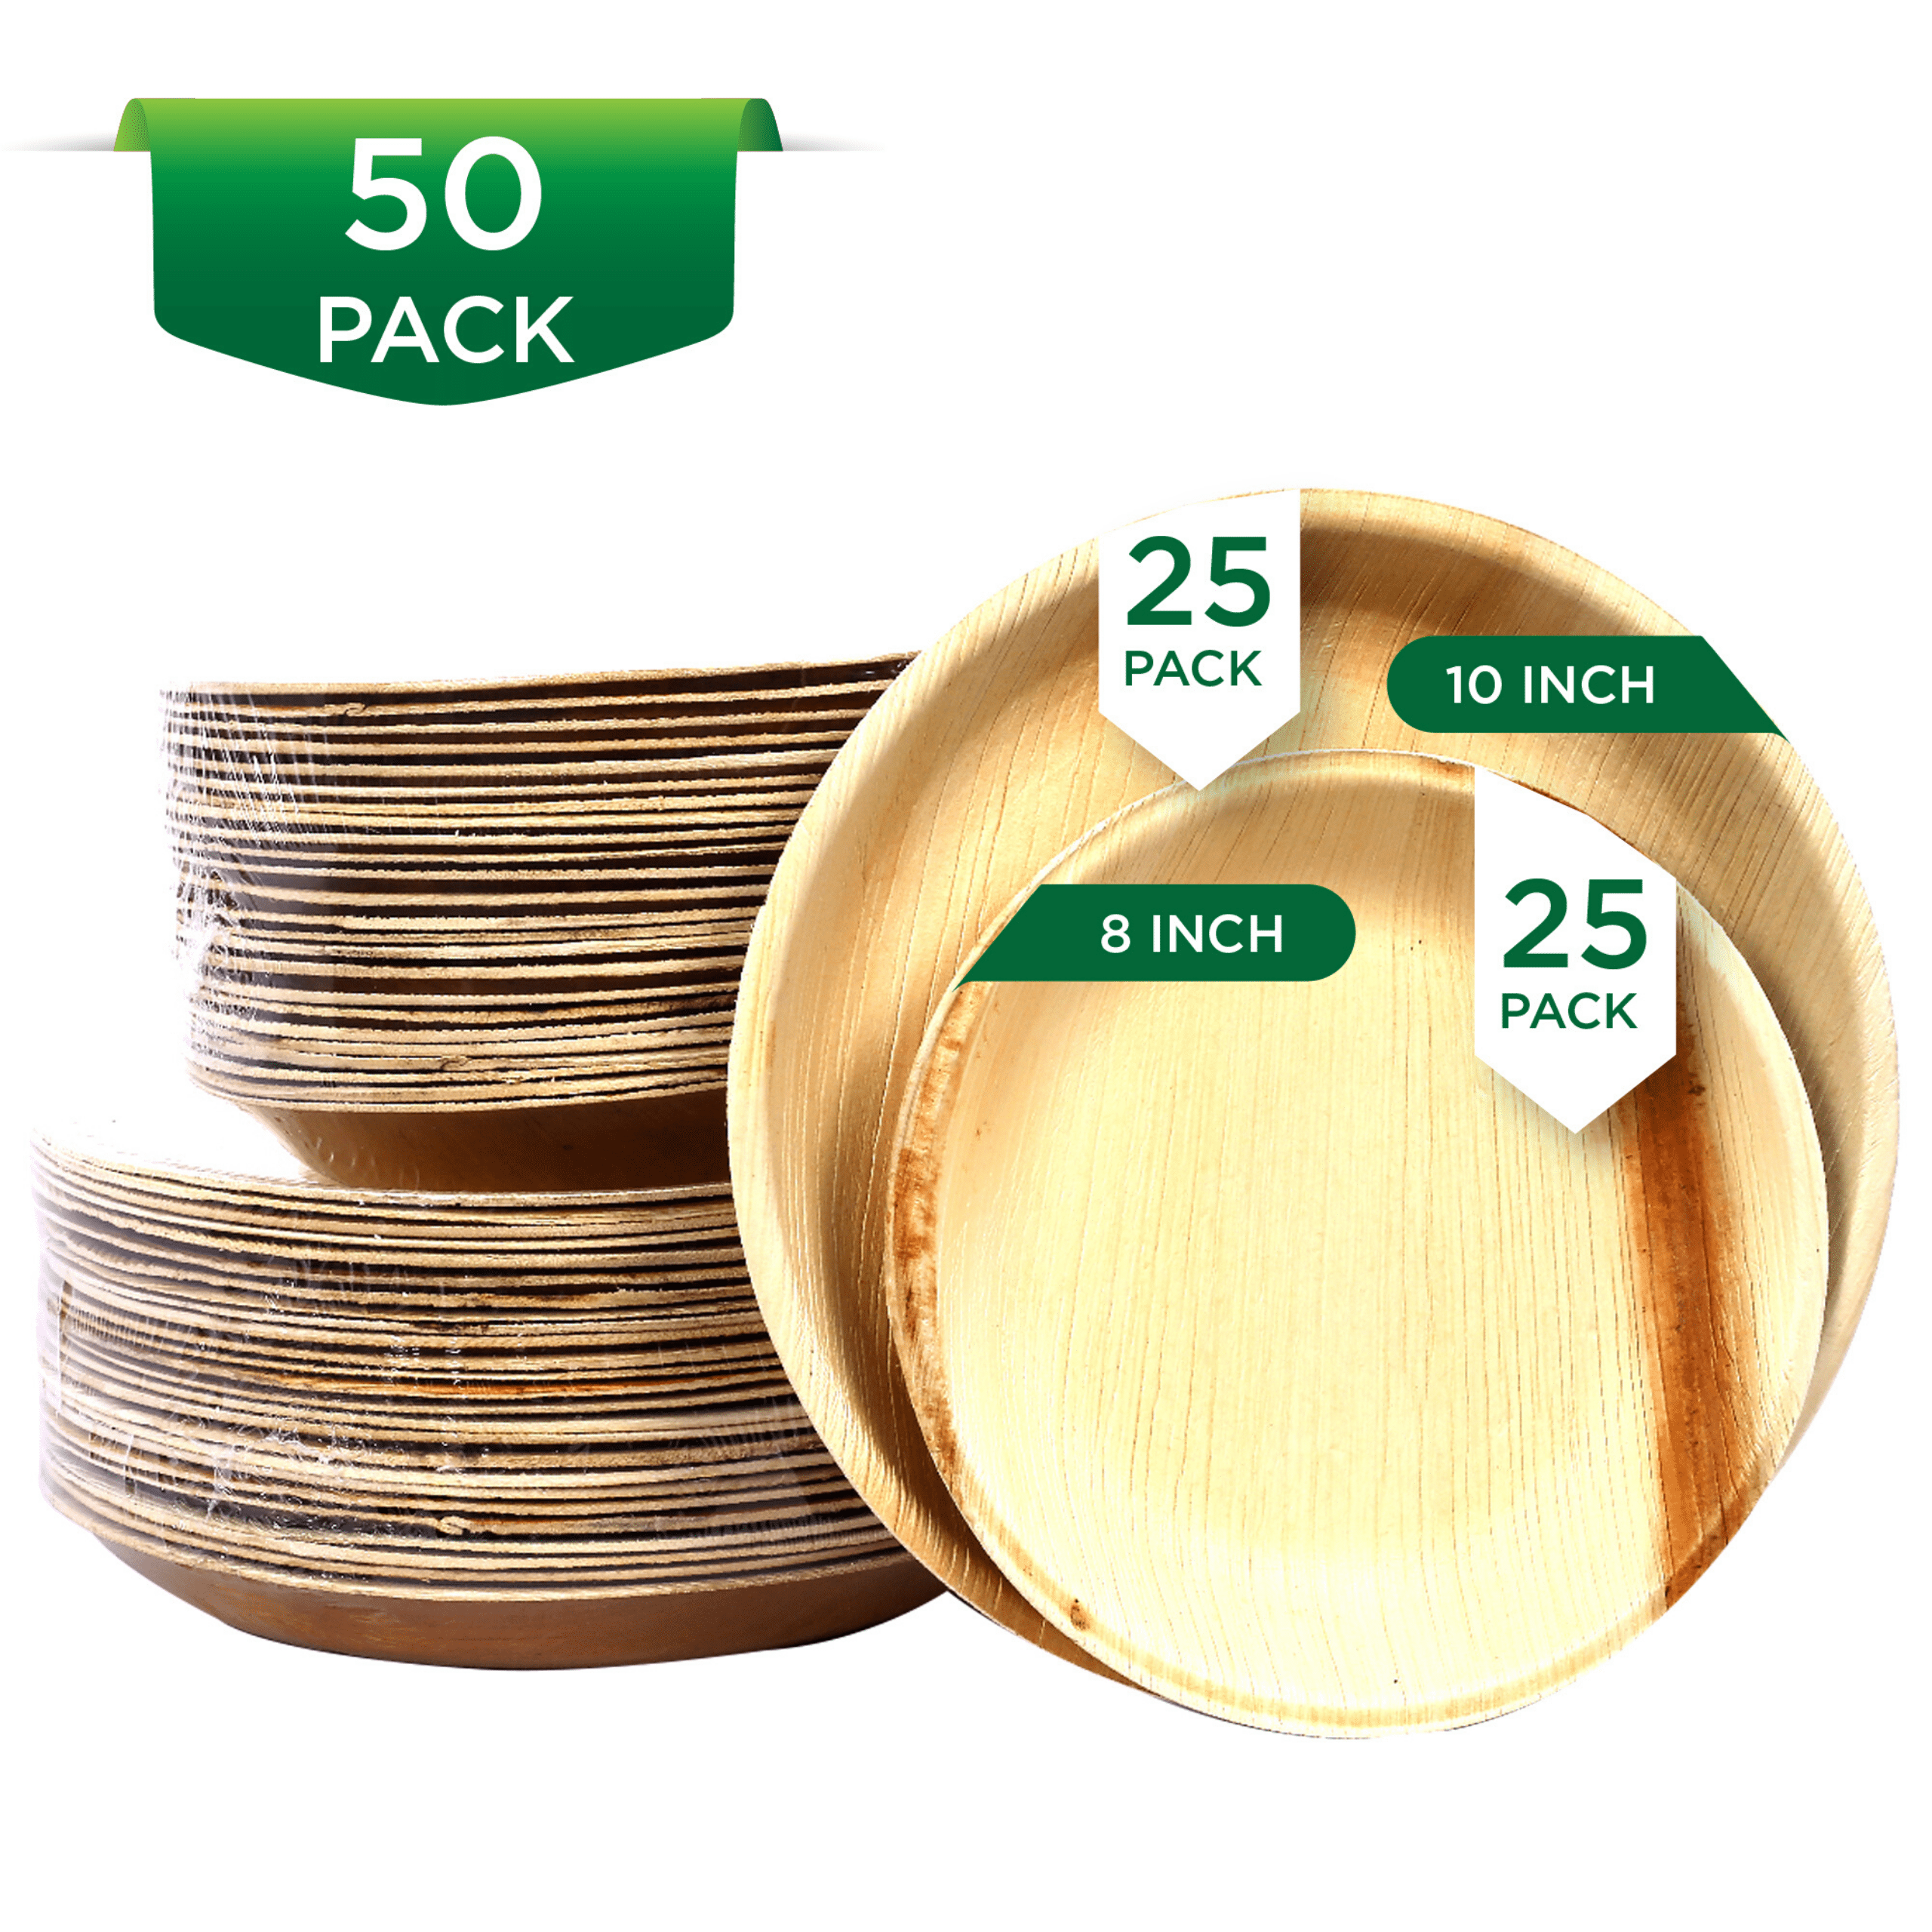 25 Pack Naturally Chic Compostable Biodegradable Disposable Plates Palm Leaf 10” Oval Small Dinnerware Set Eco Friendly Alternative Event Plates Wedding Party 